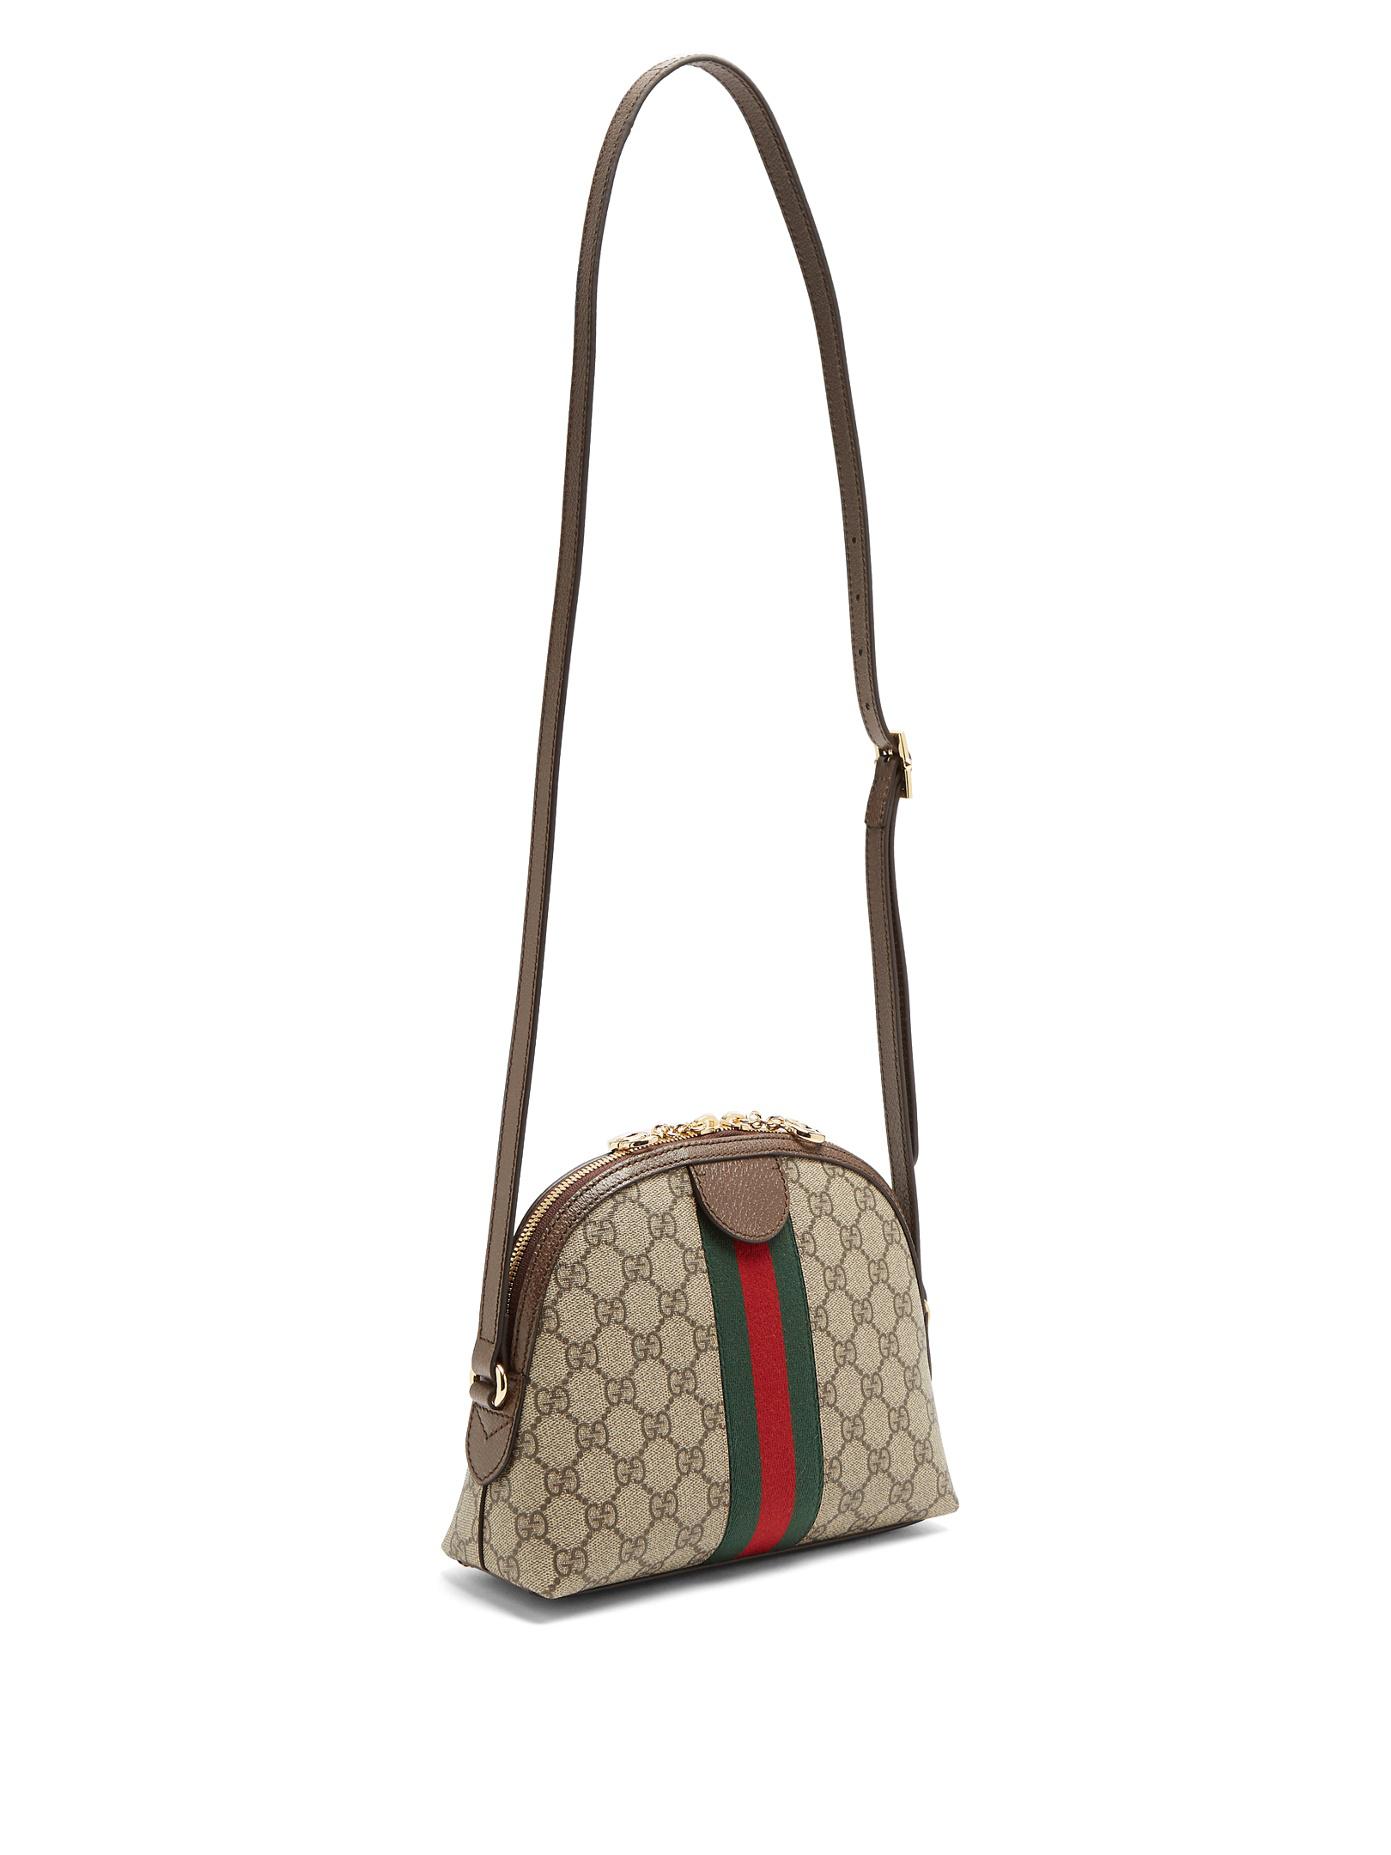 Gucci Ophidia Gg Supreme Cross-body Bag in Brown - Lyst